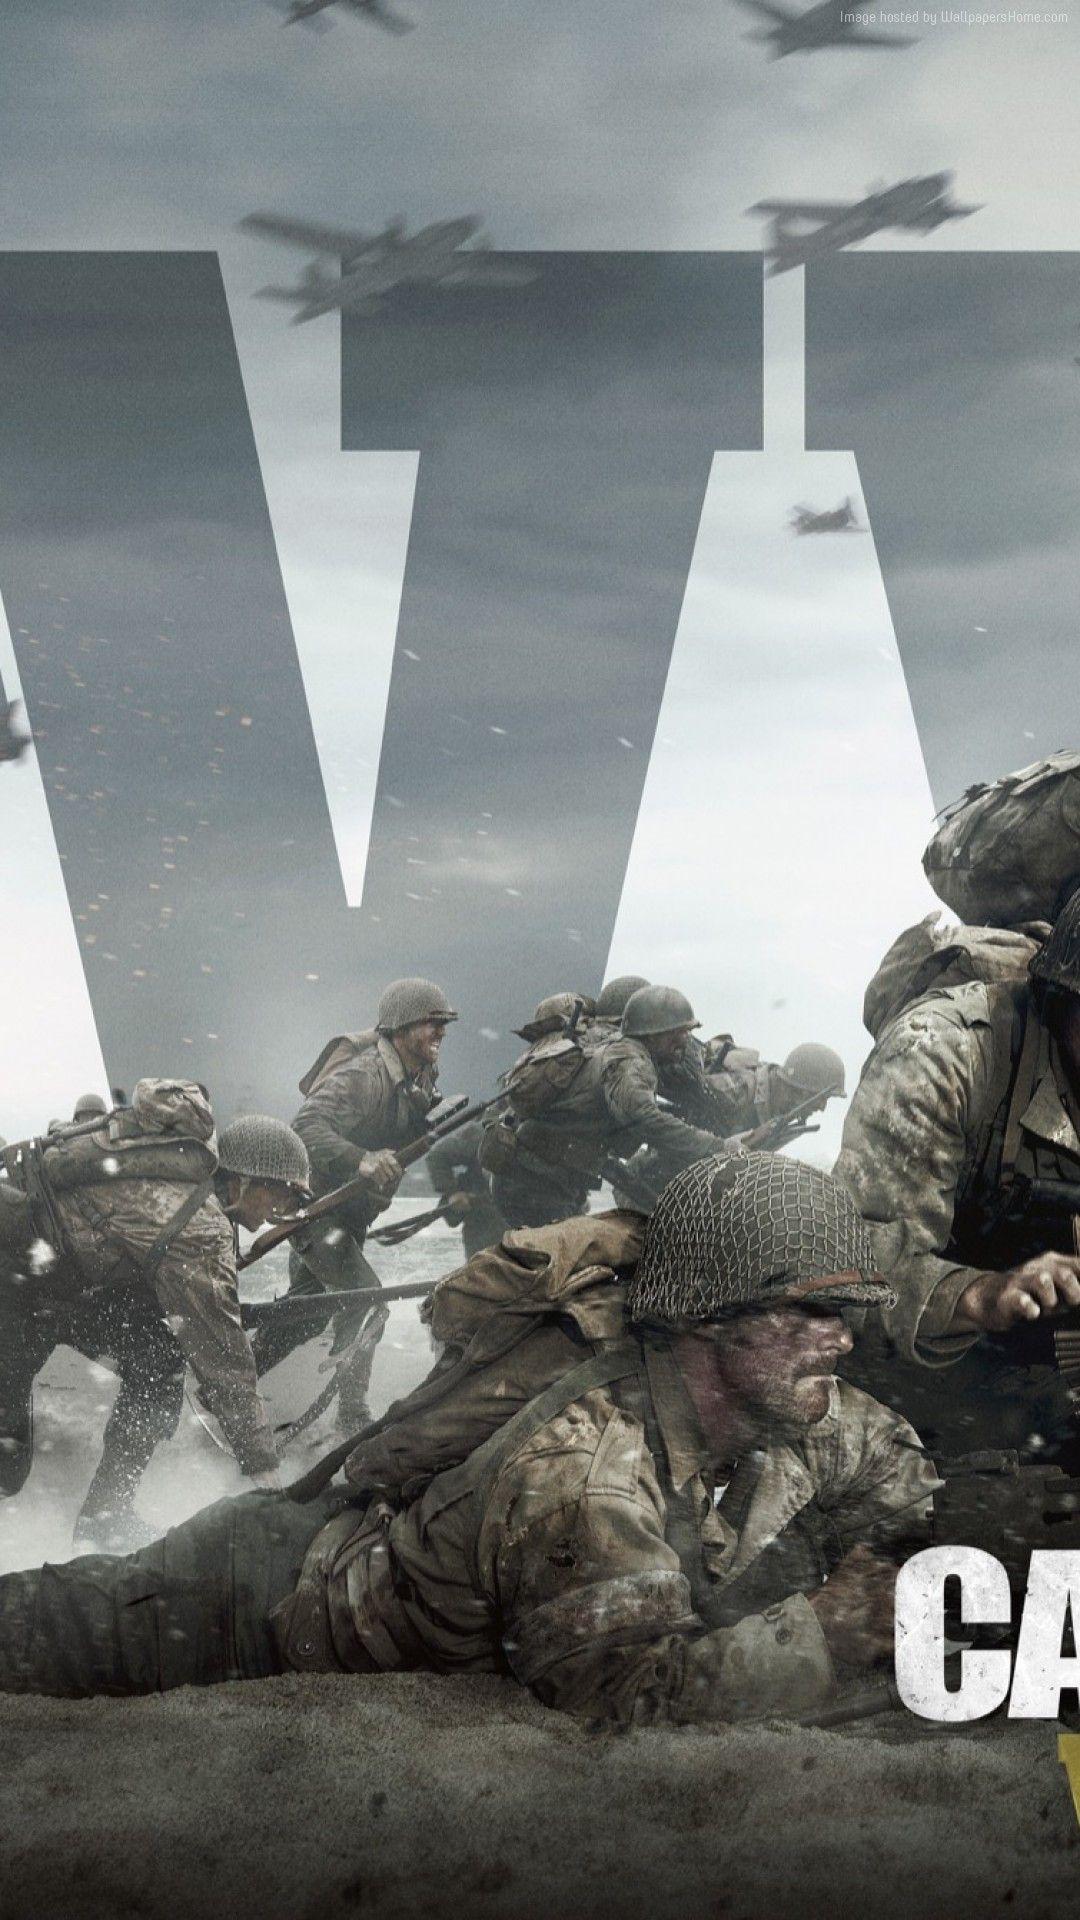 Wallpaper ID 391875  Video Game Call of Duty WWII Phone Wallpaper  Soldier 1080x1920 free download